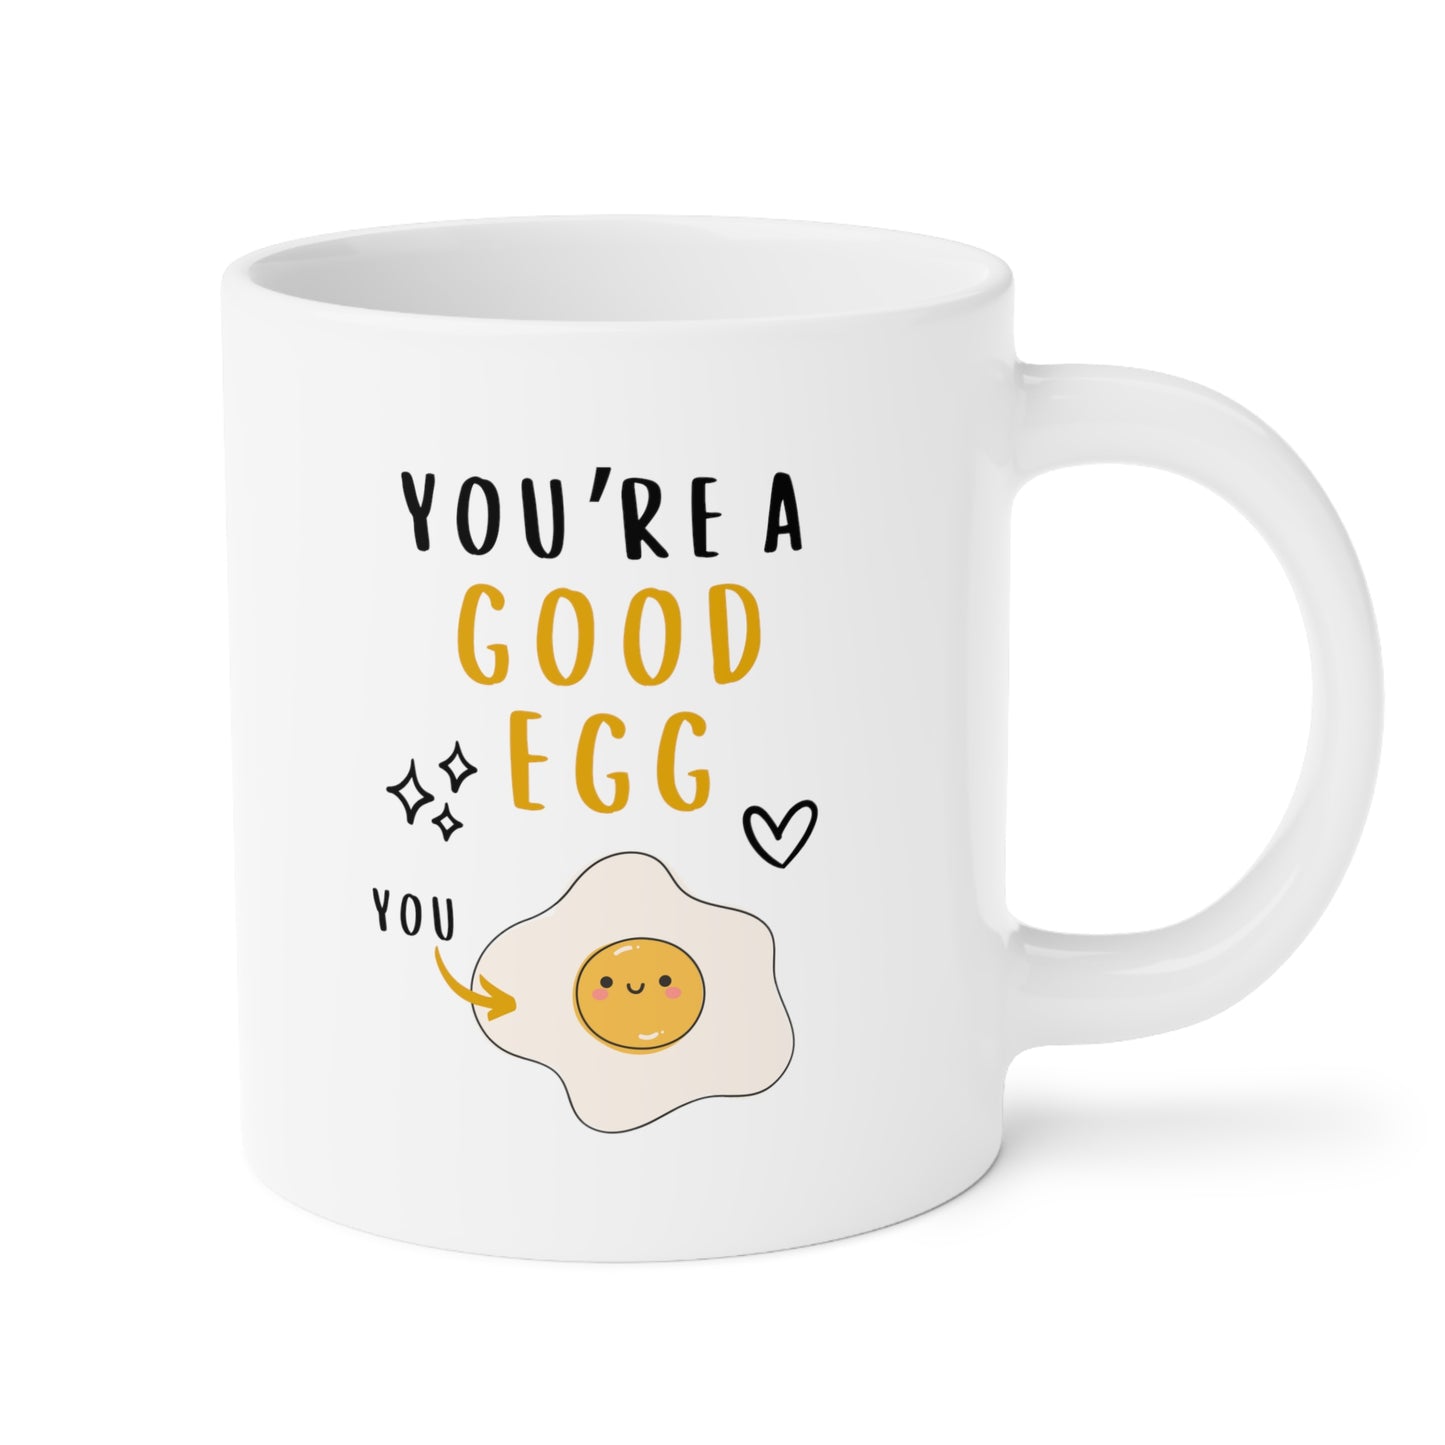 Youre a good egg 20oz white funny large big coffee mug tea cup gift for bff friend mothers day gift waveywares wavey wares wavywares wavy wares